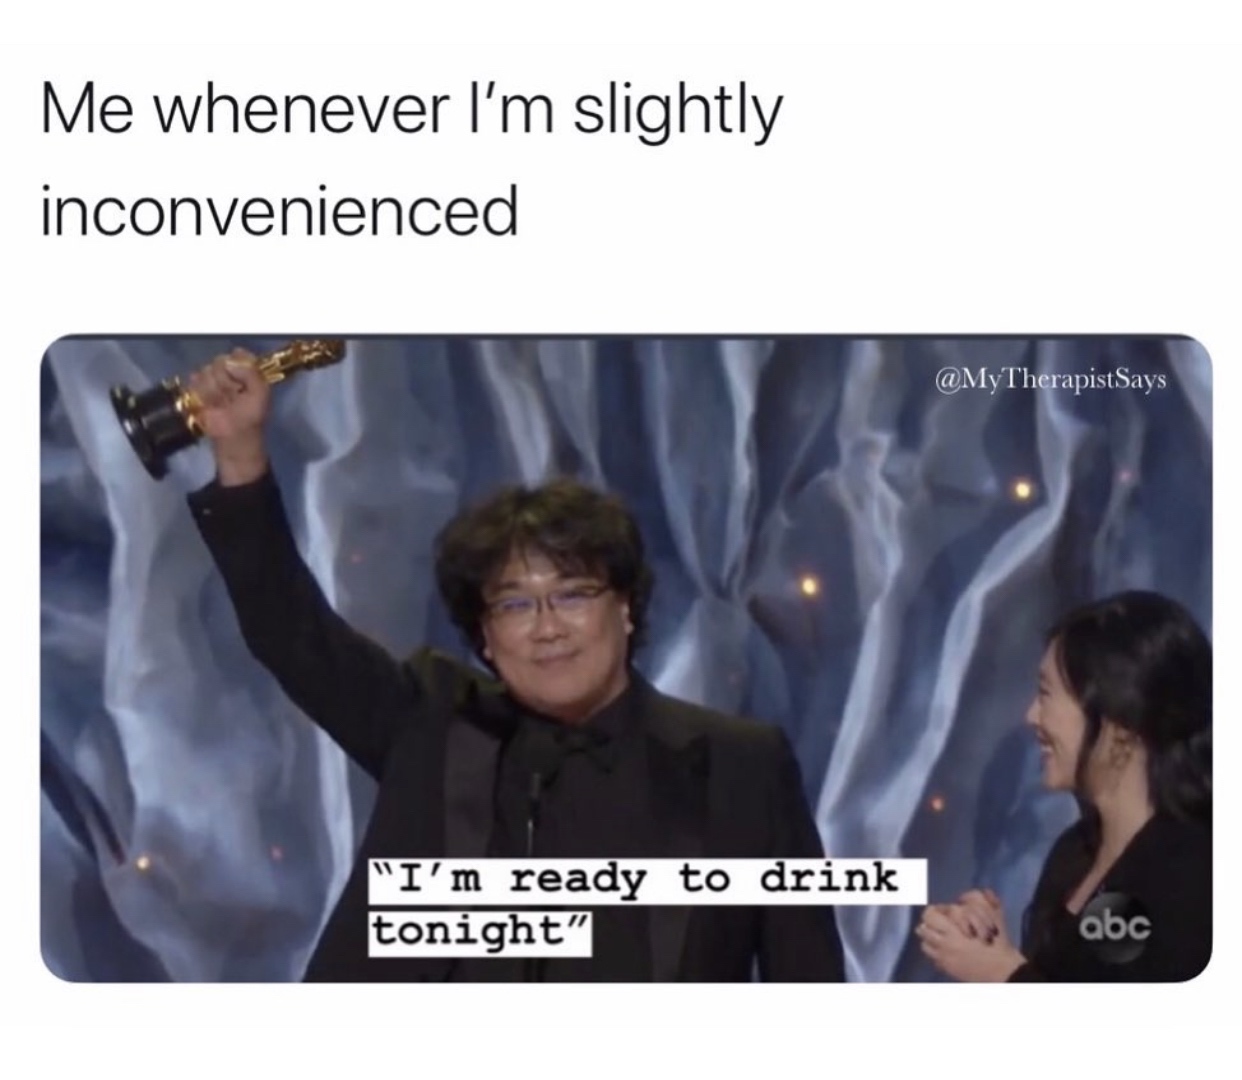 presentation - Me whenever I'm slightly inconvenienced Says "I'm ready to drink tonight" abc